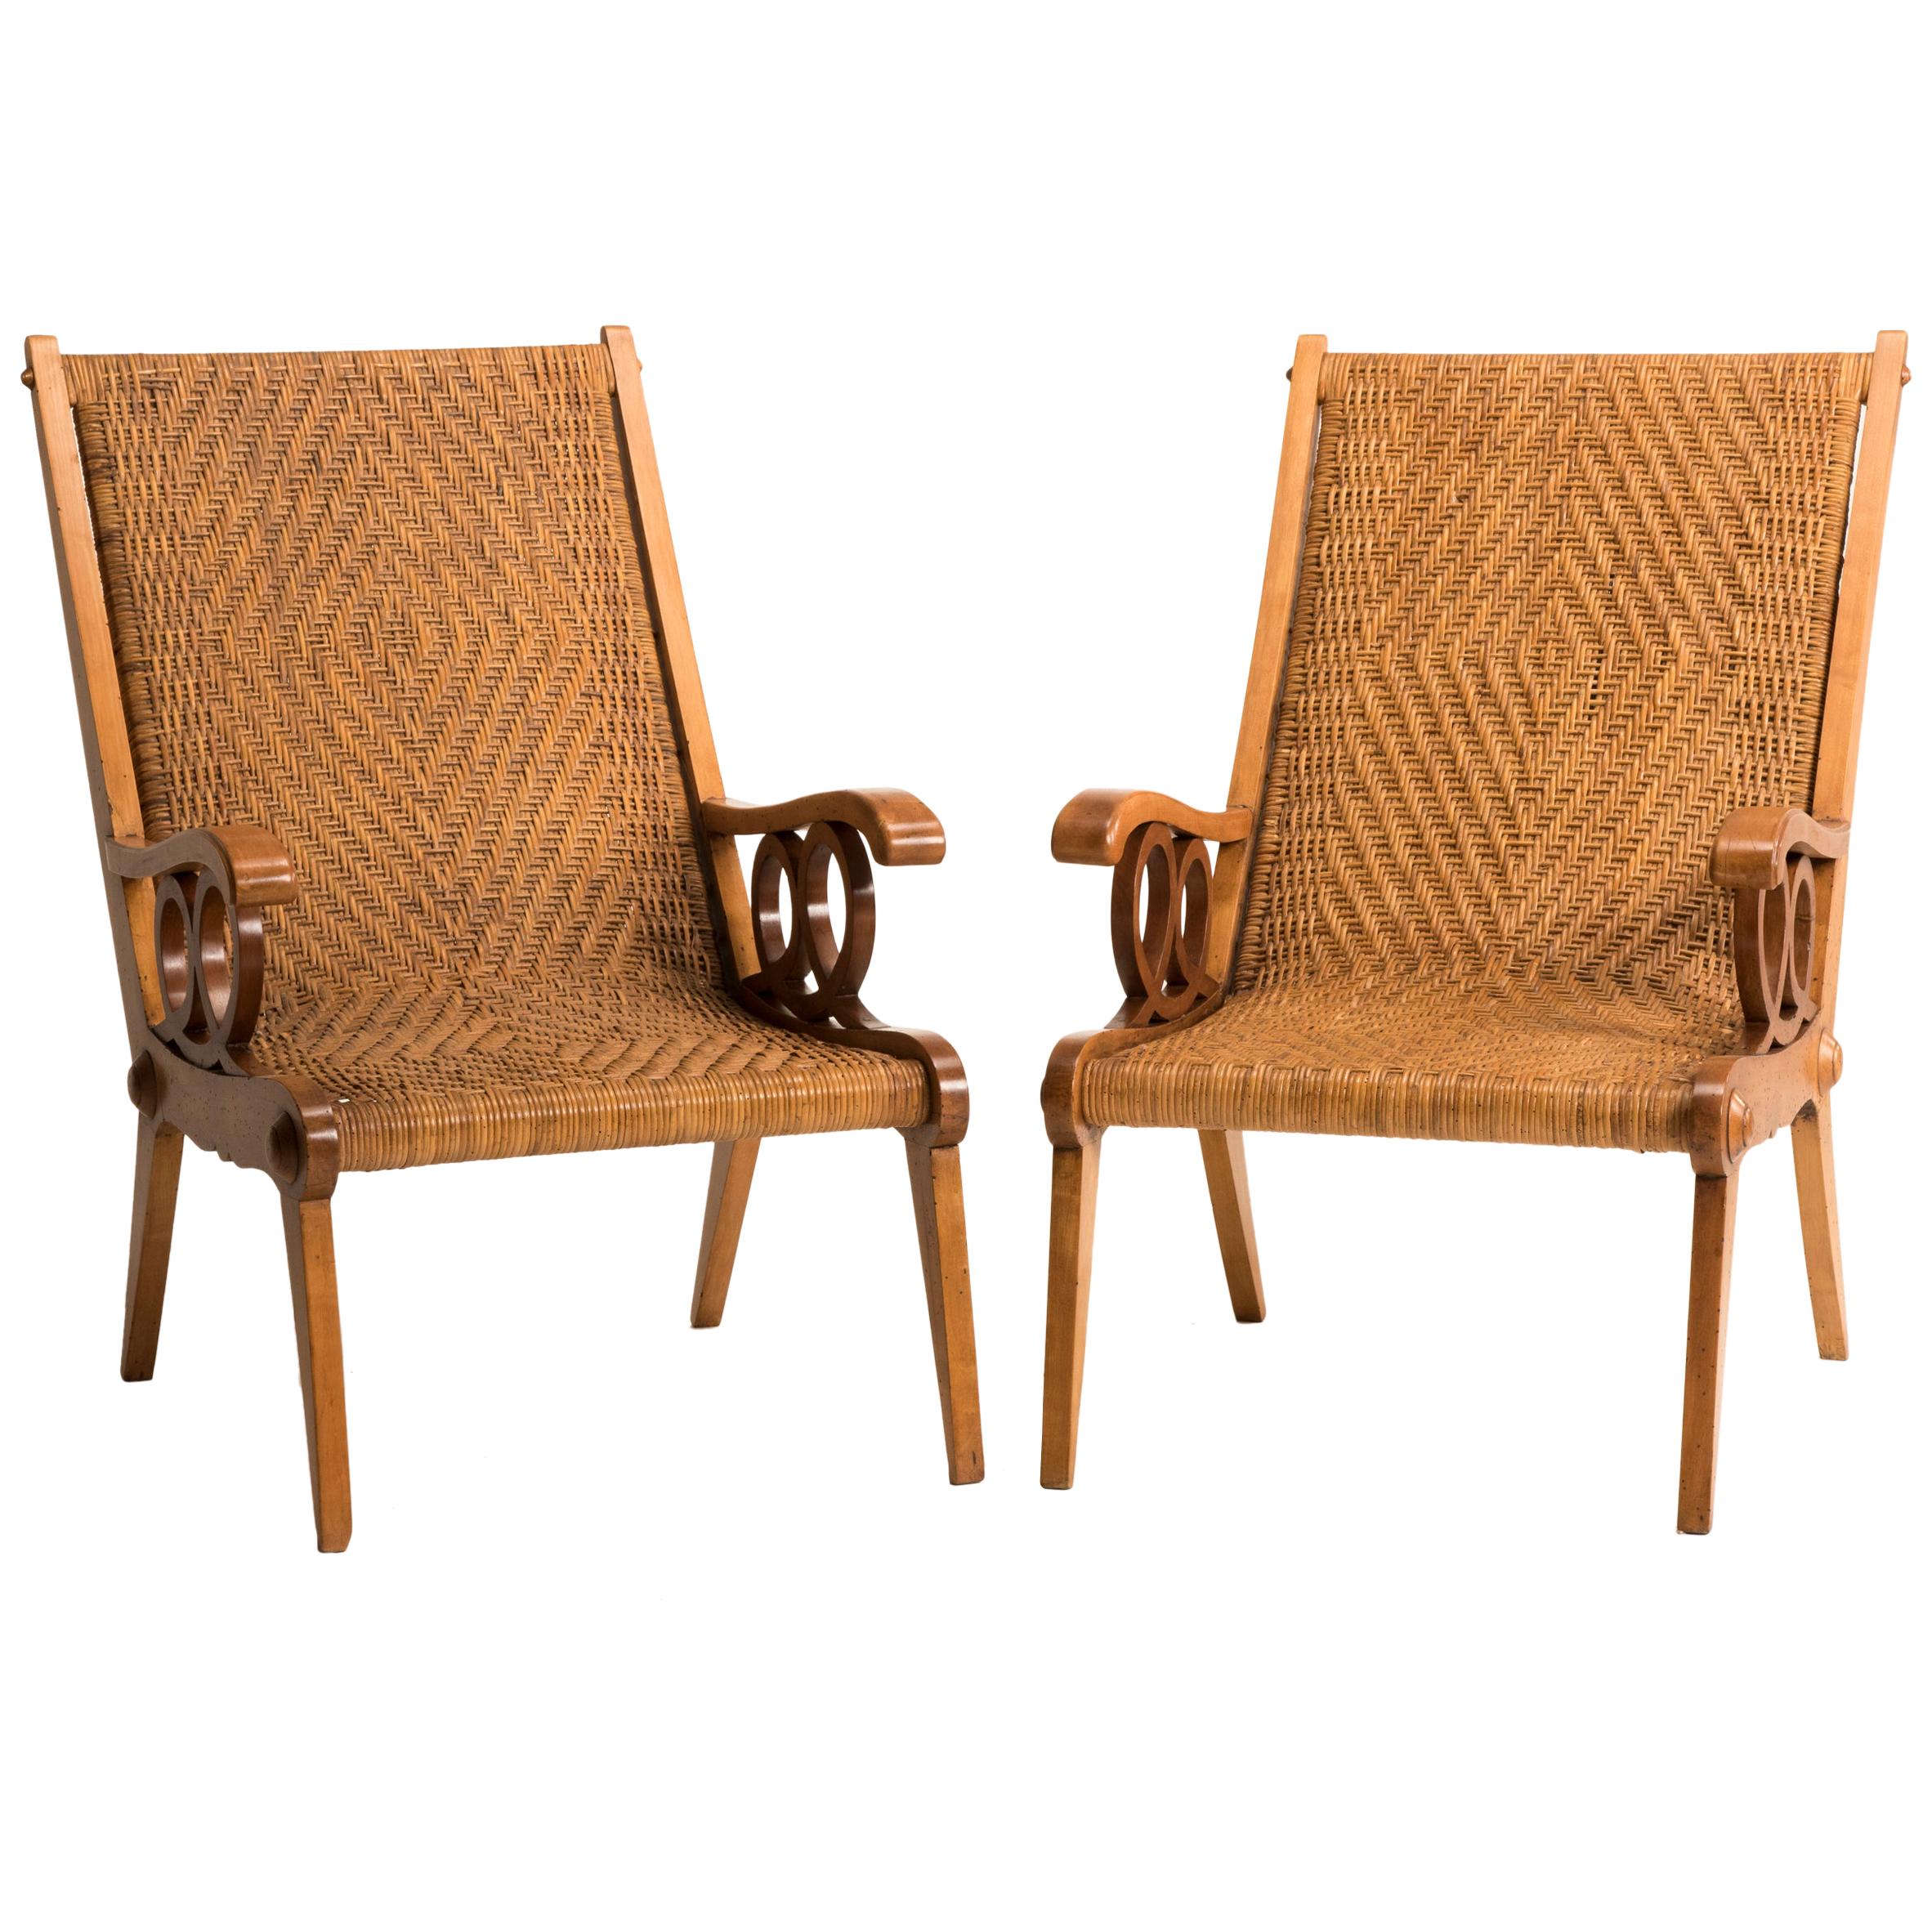 Midcentury Italian Wood and Original Woven Wicker Armchairs, Set of Two